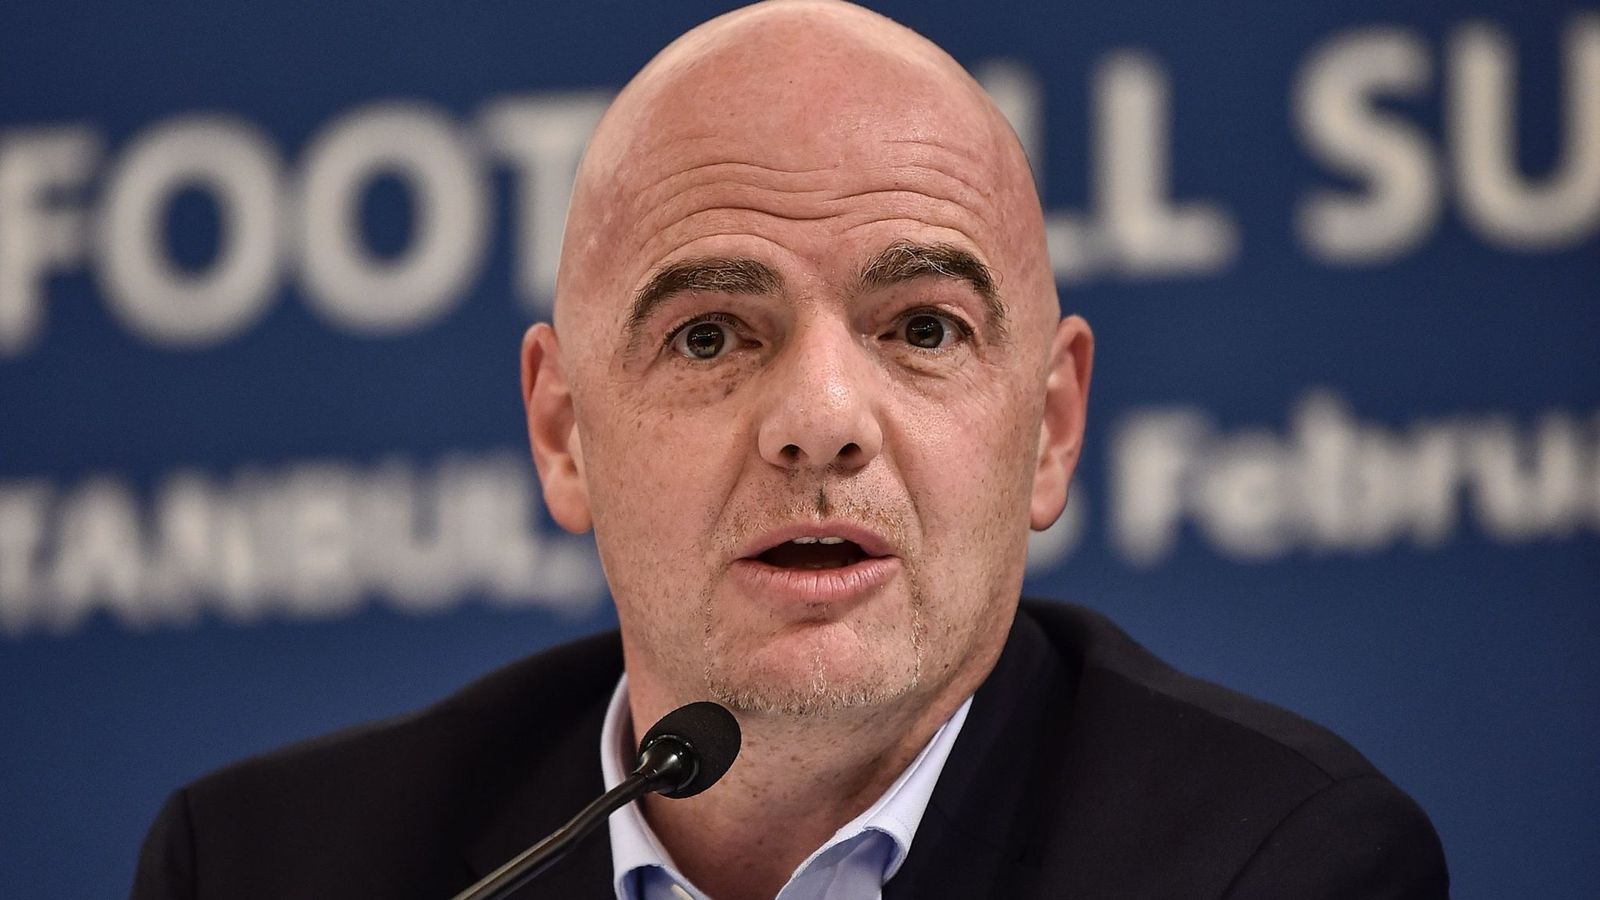 Gianni Infantino re-elected as FIFA president unopposed | International Highlights